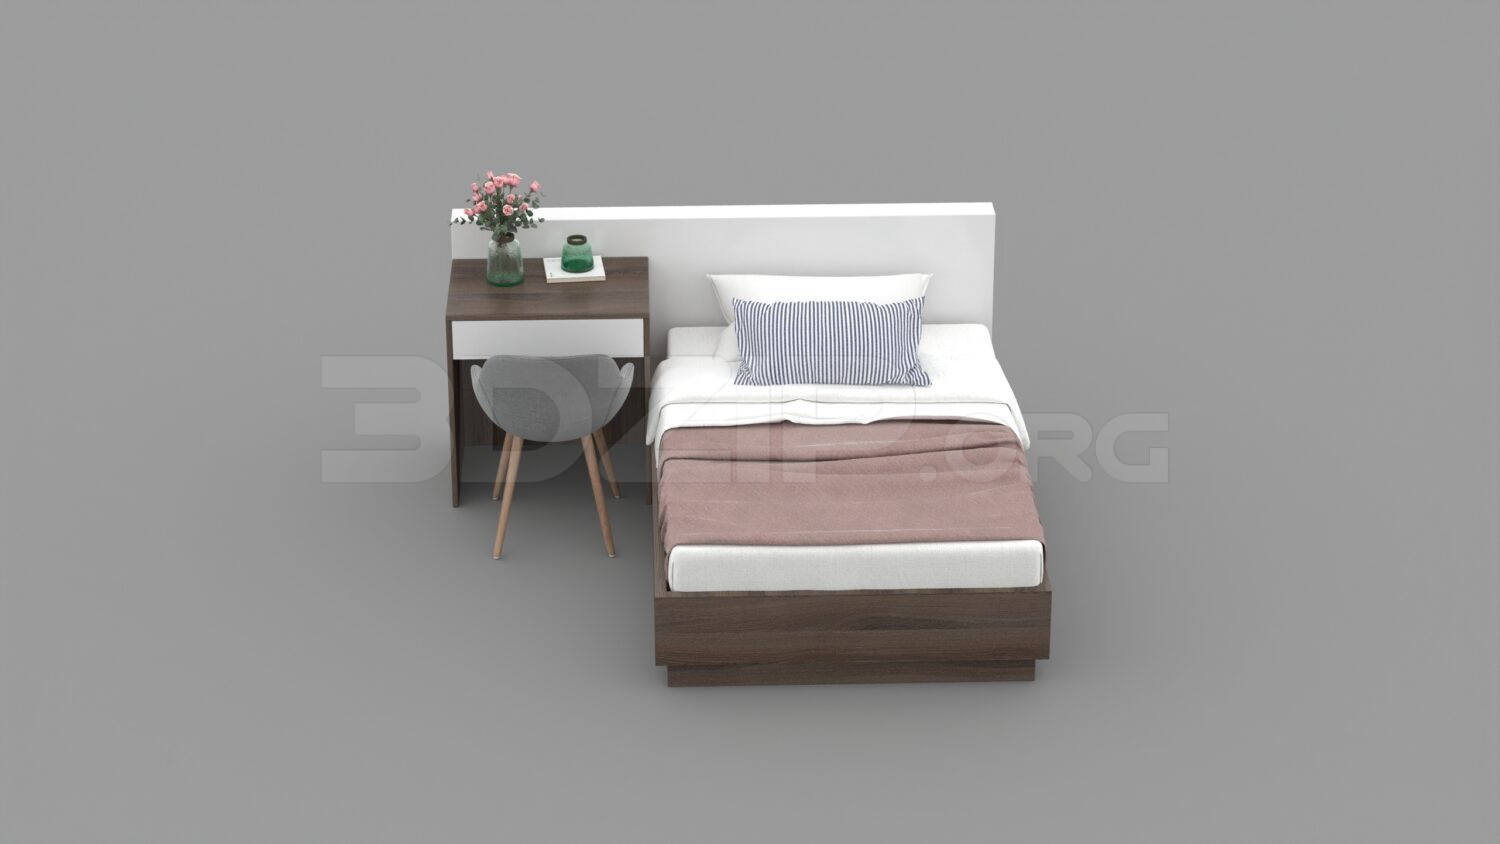 1359. Download Free Bed Model By Hoang Tuan